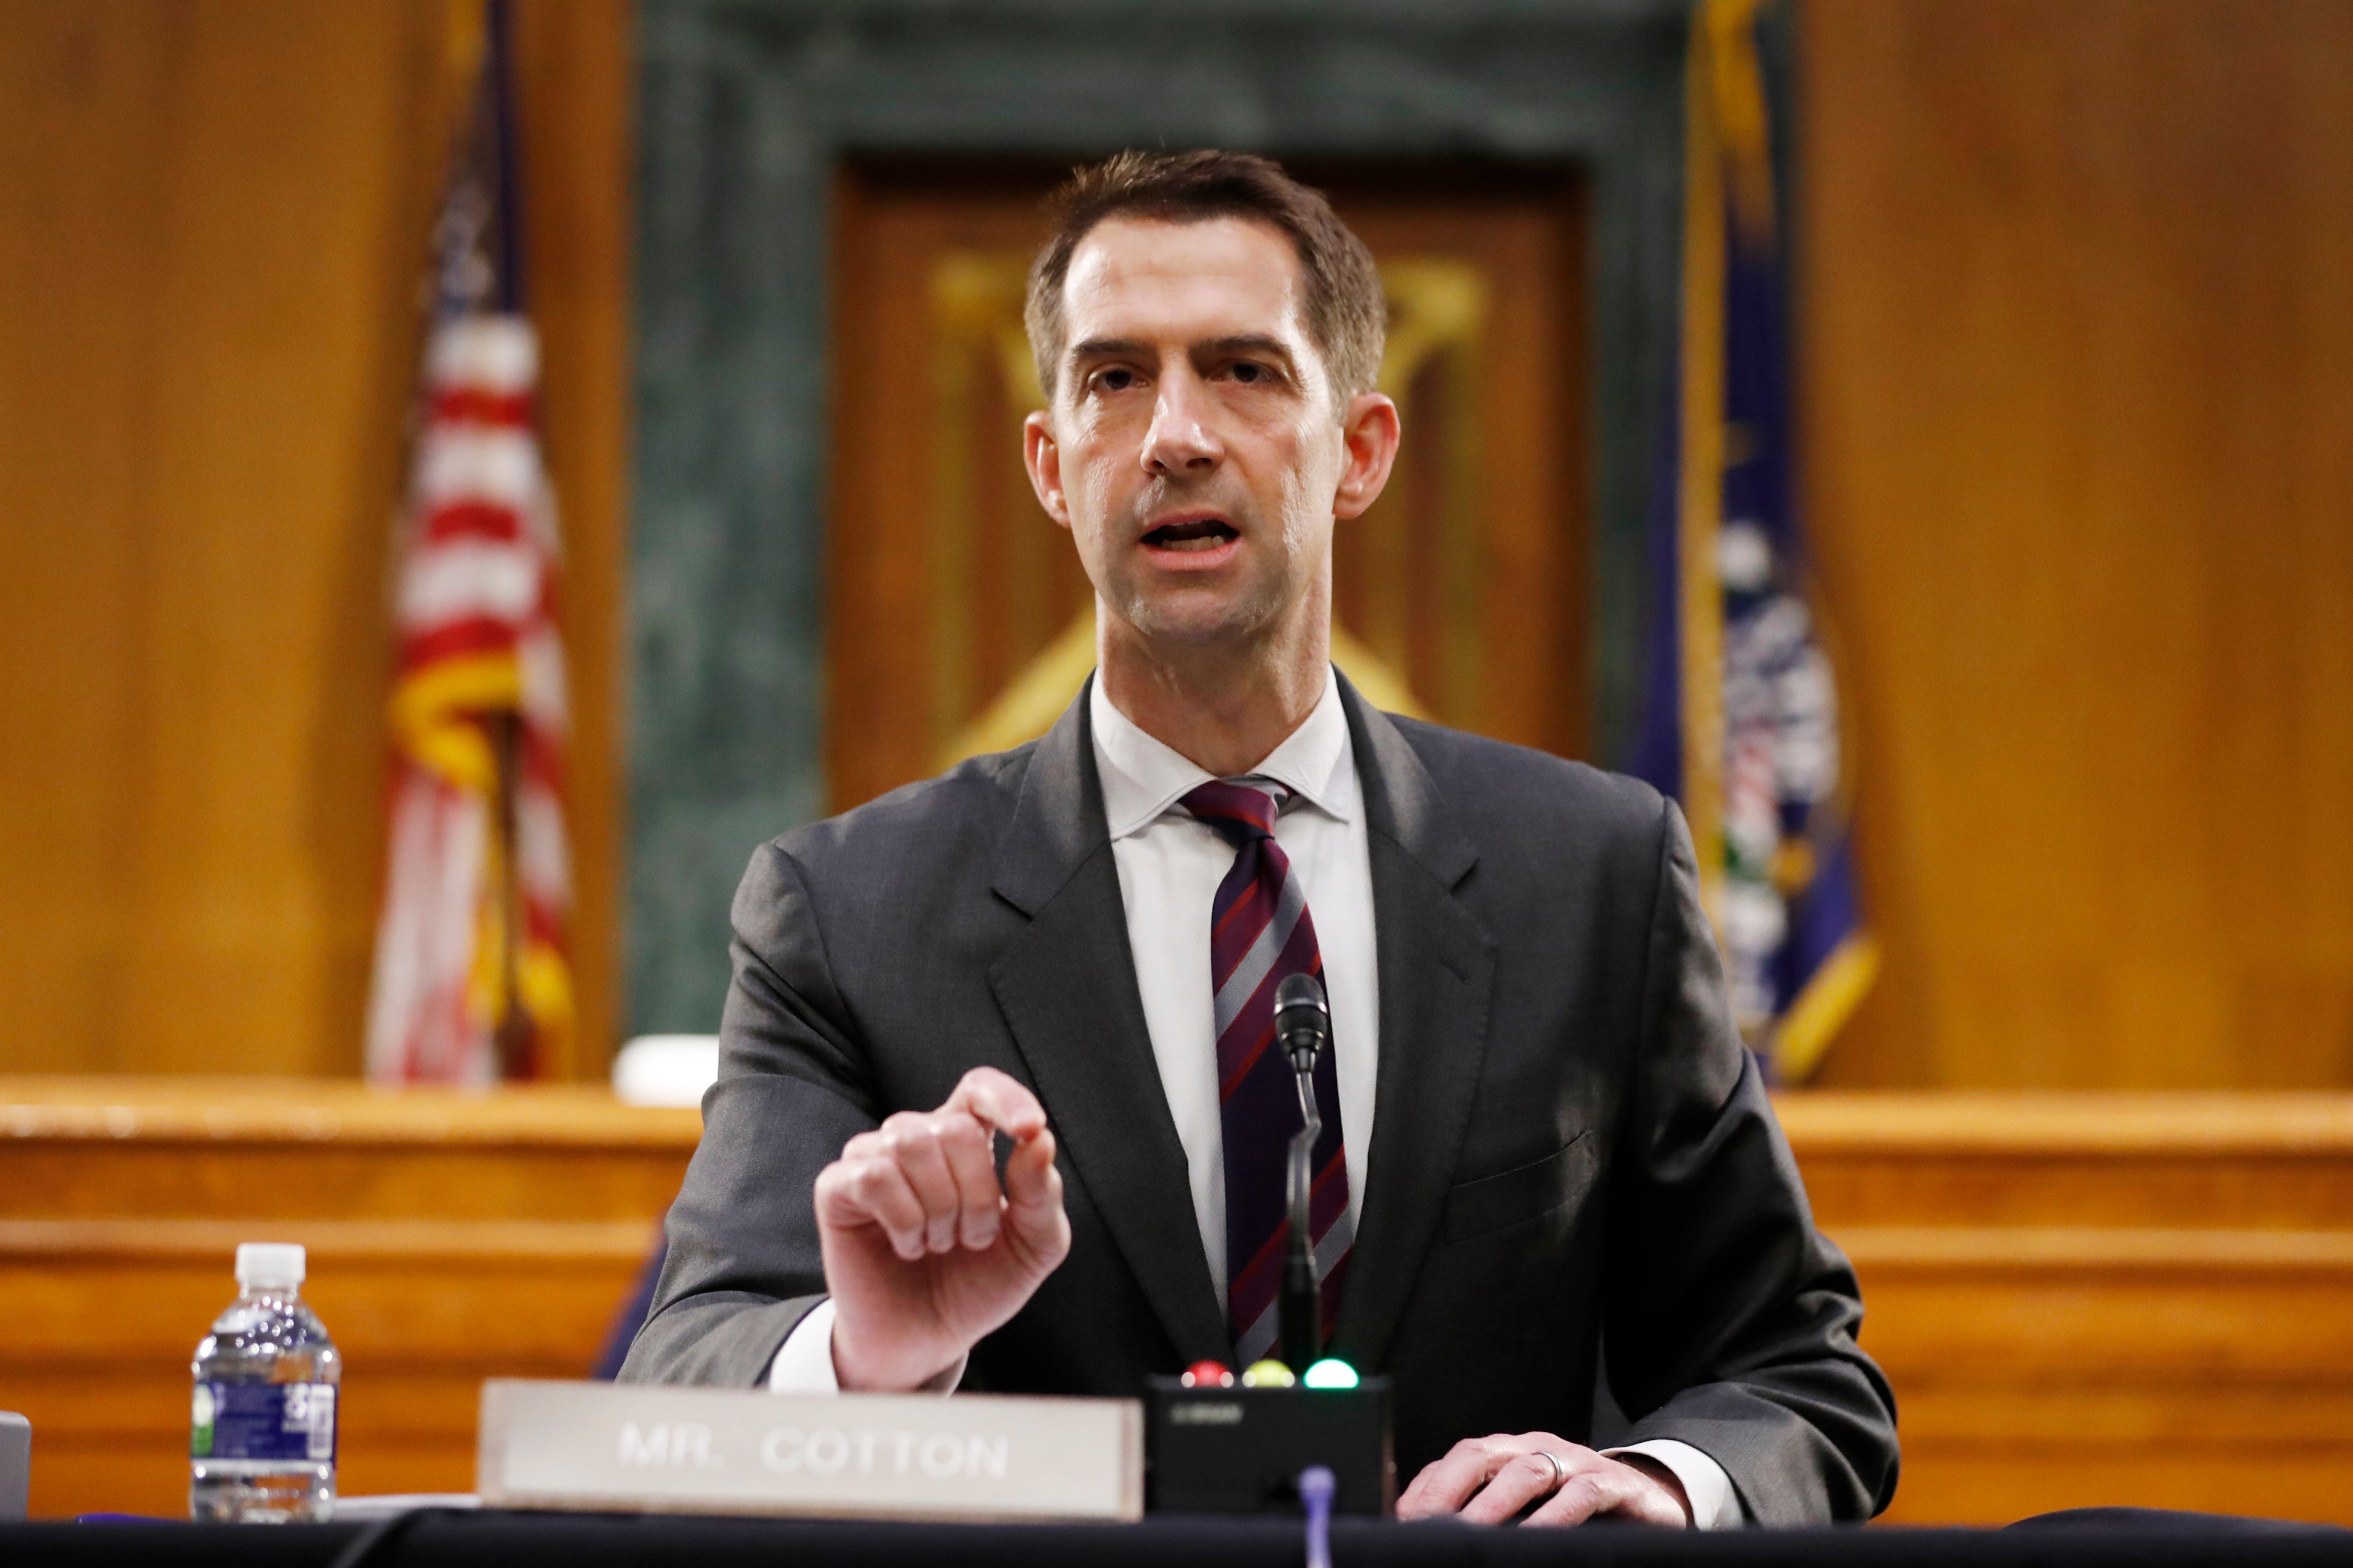 Tom Cotton said he would be 'honoured' to serve on the court